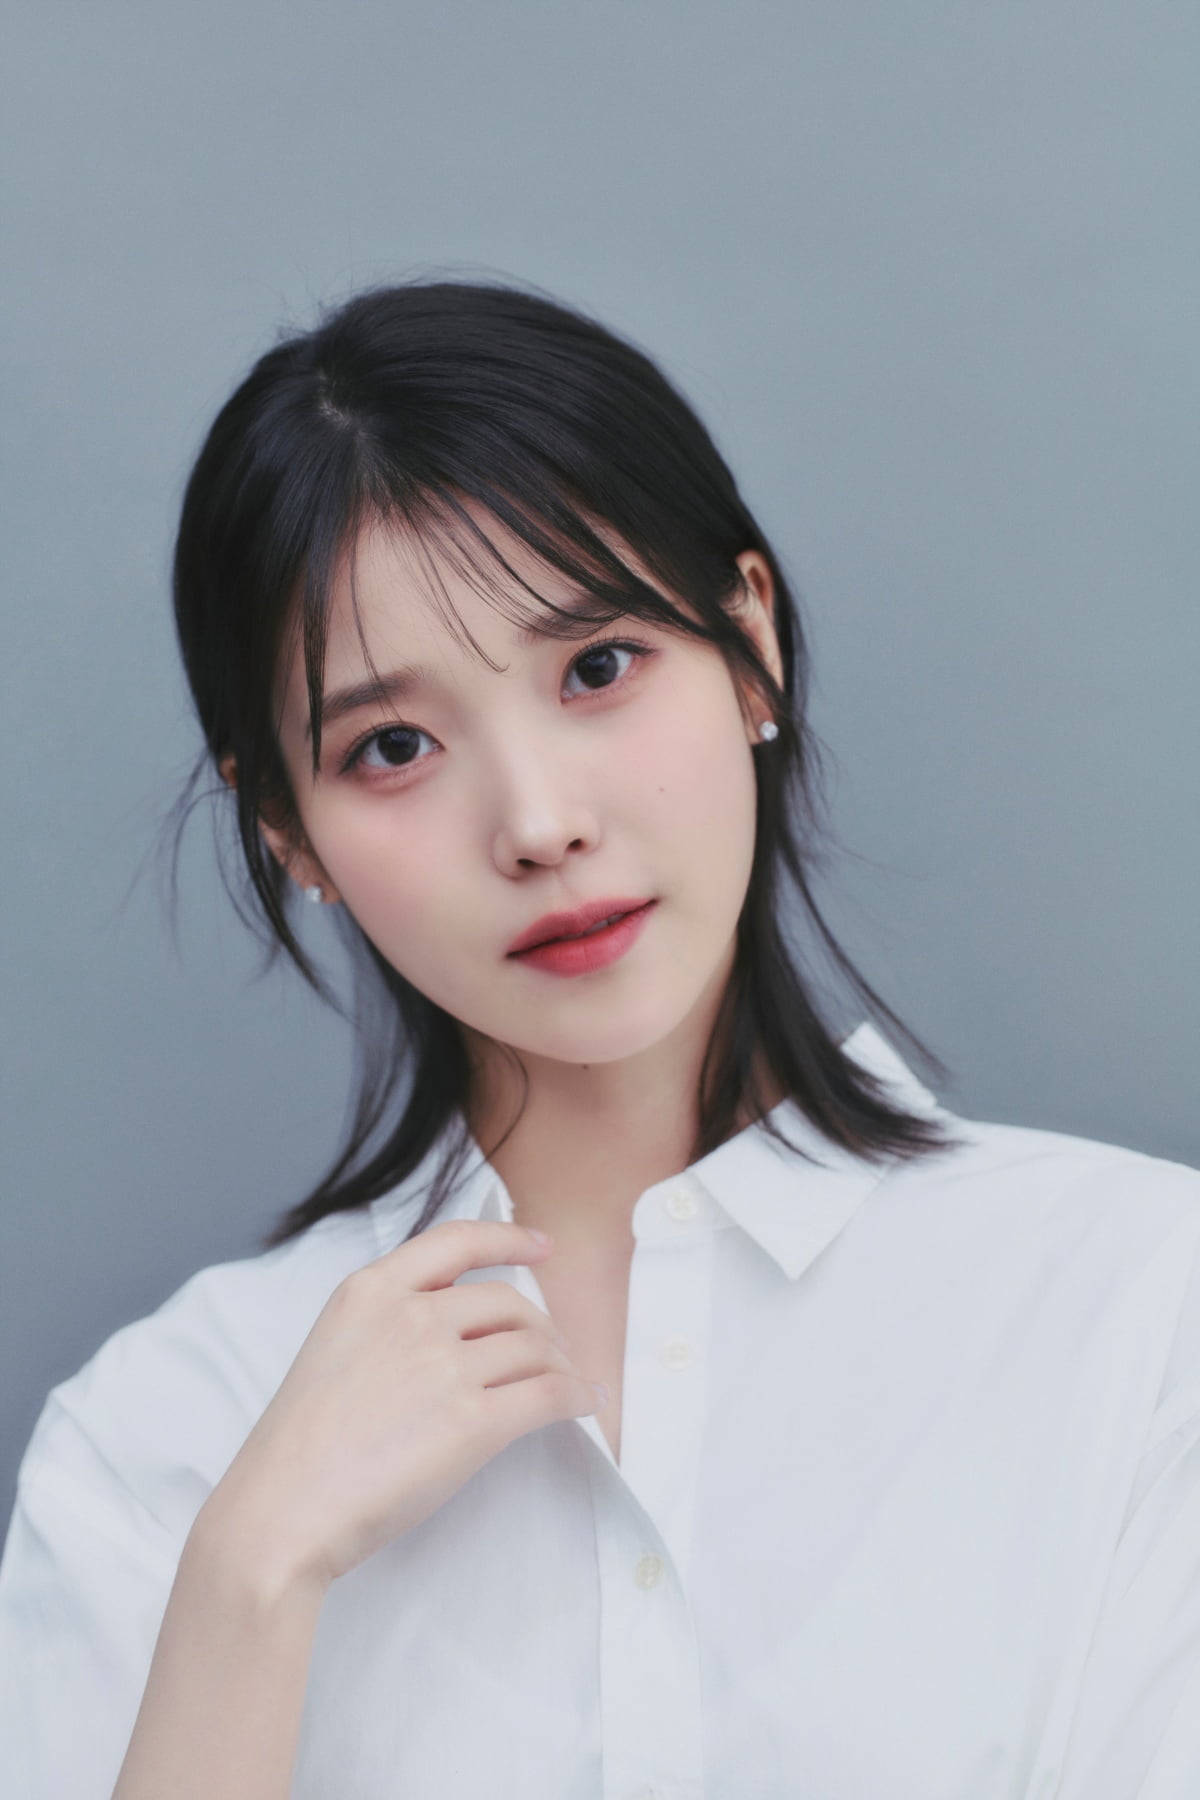 IU's side "No condoning personal attacks, preparing for additional complaints"